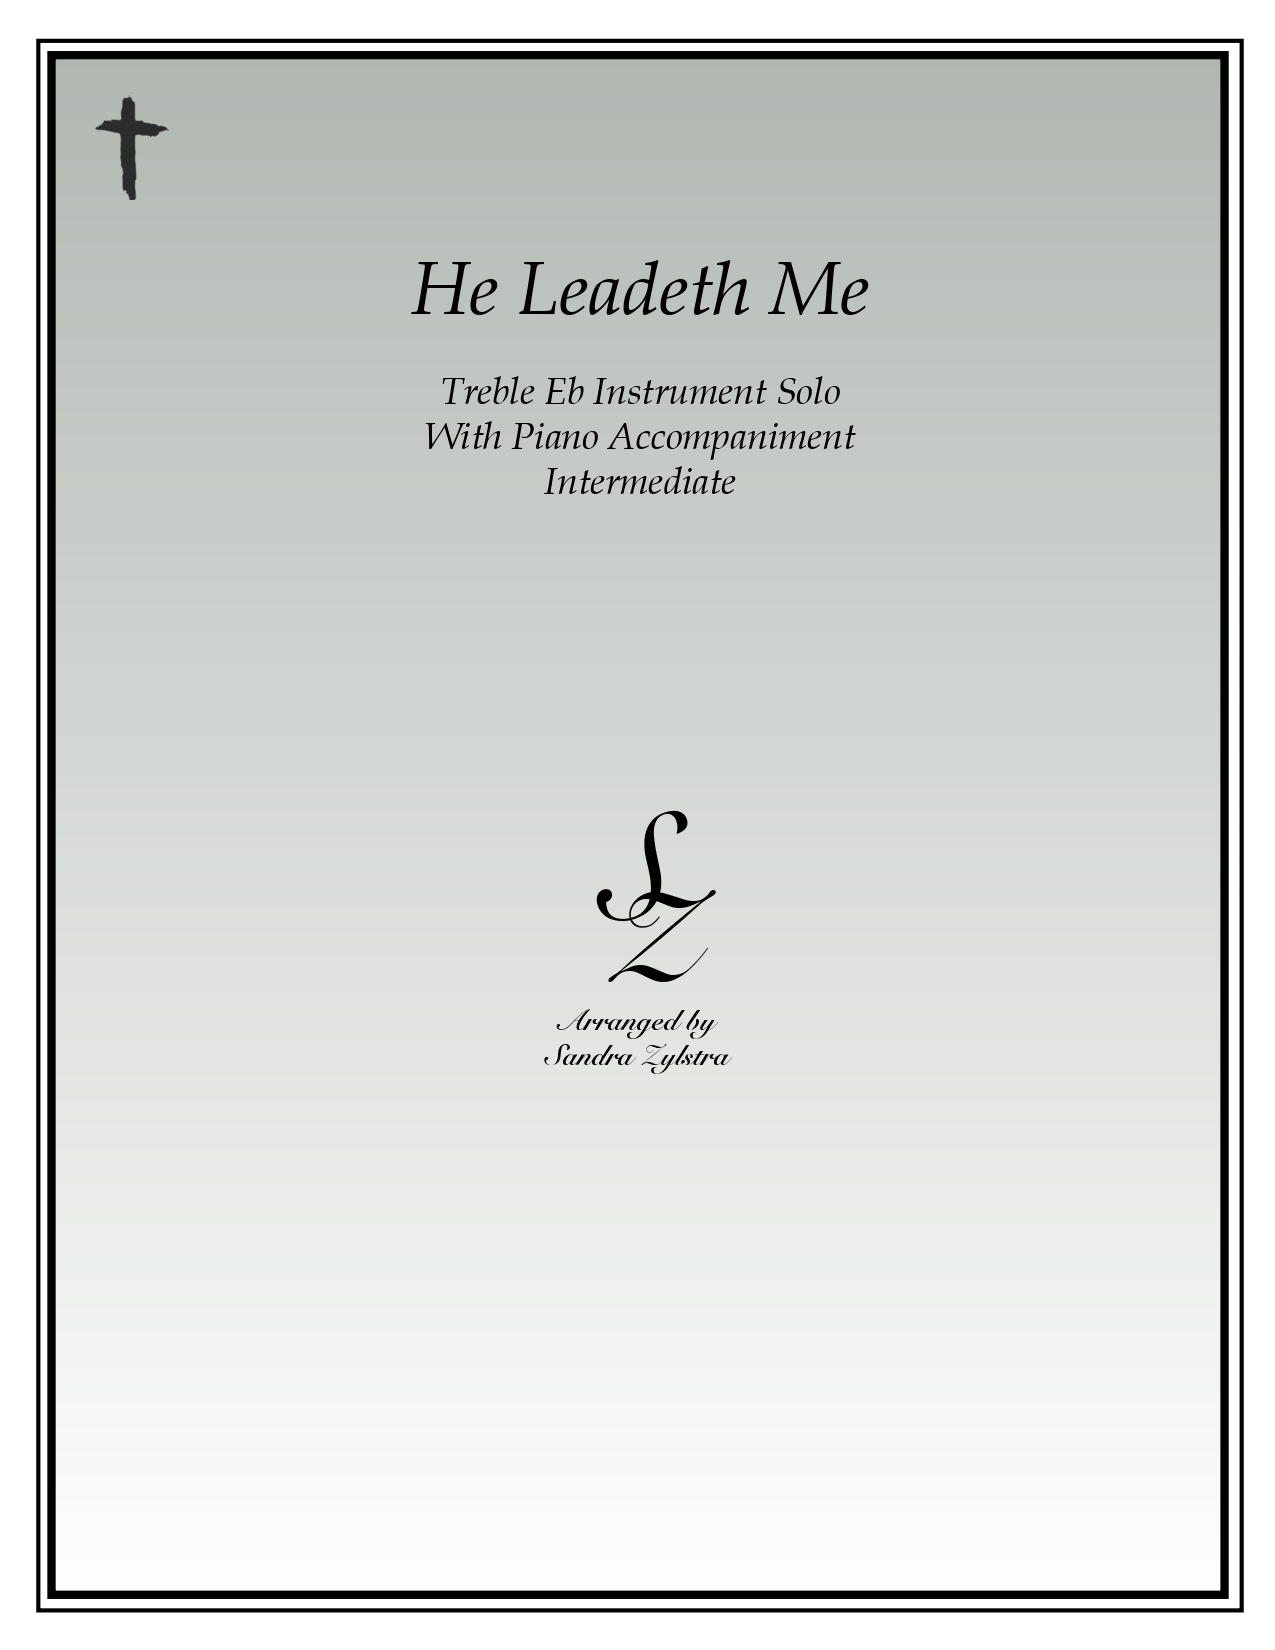 He Leadeth Me Eb instrument solo part cover page 00011